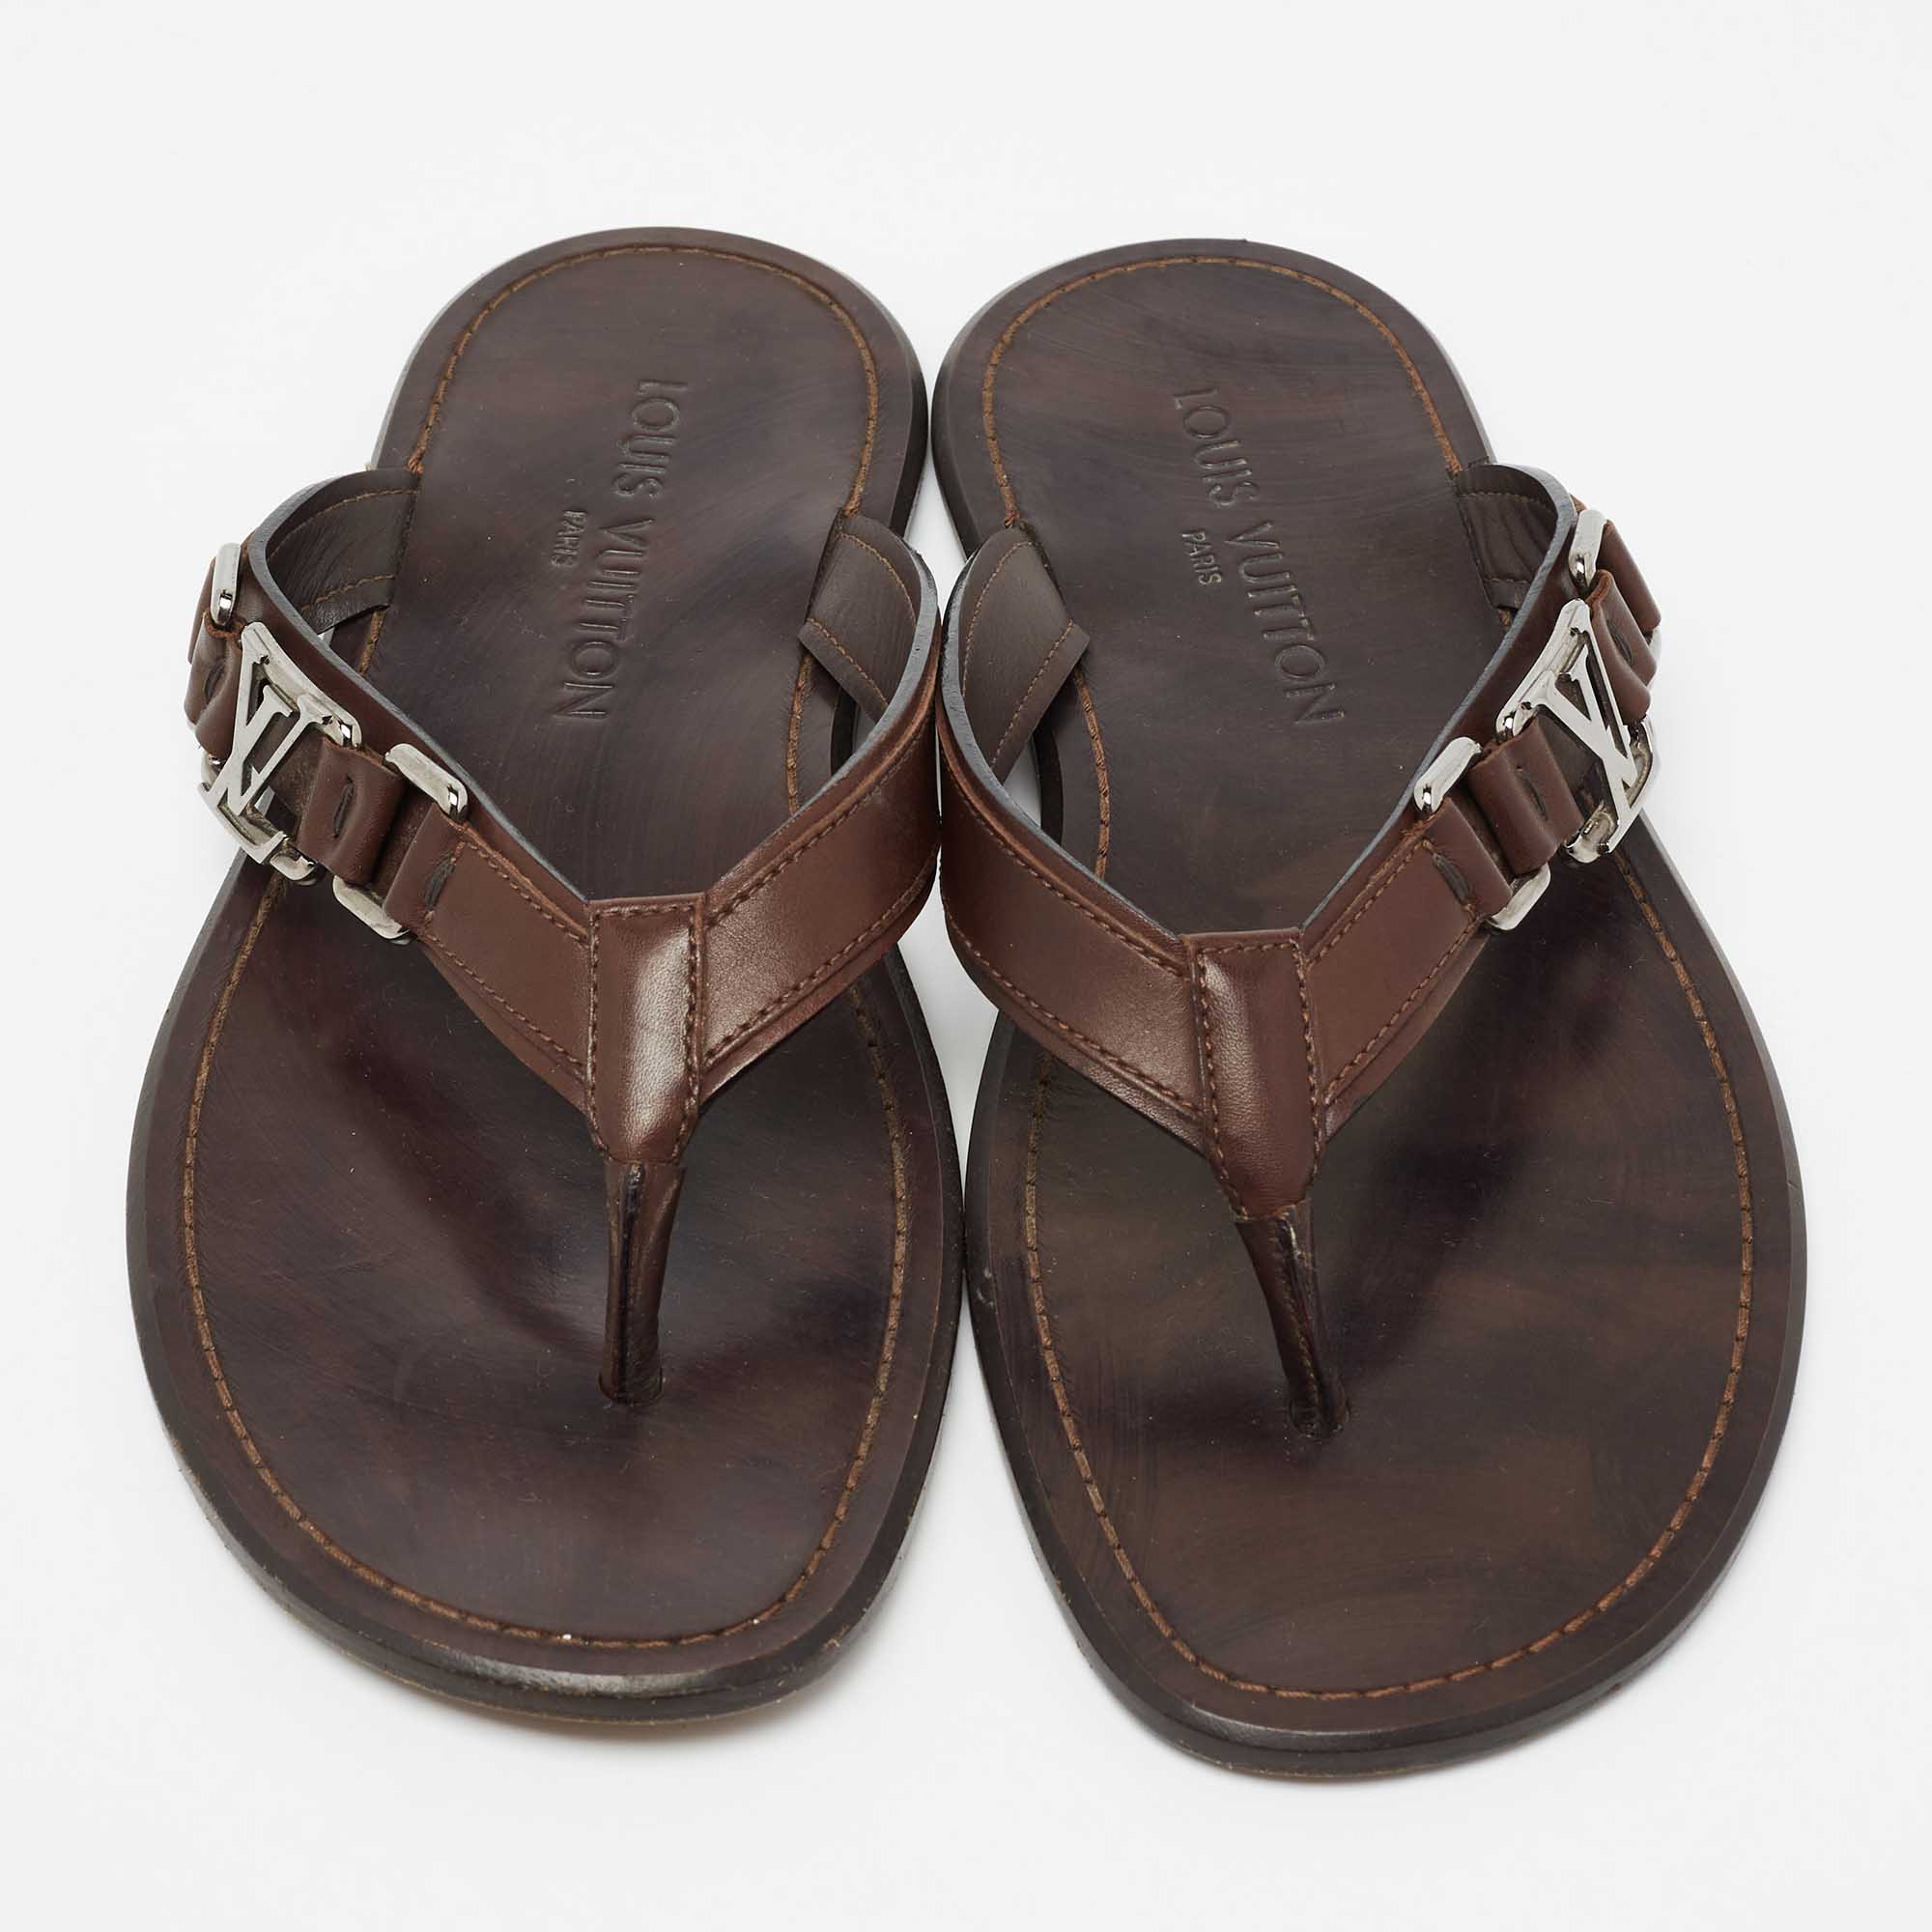 Leather sandal Louis Vuitton Brown size 40 EU in Leather - 32842366